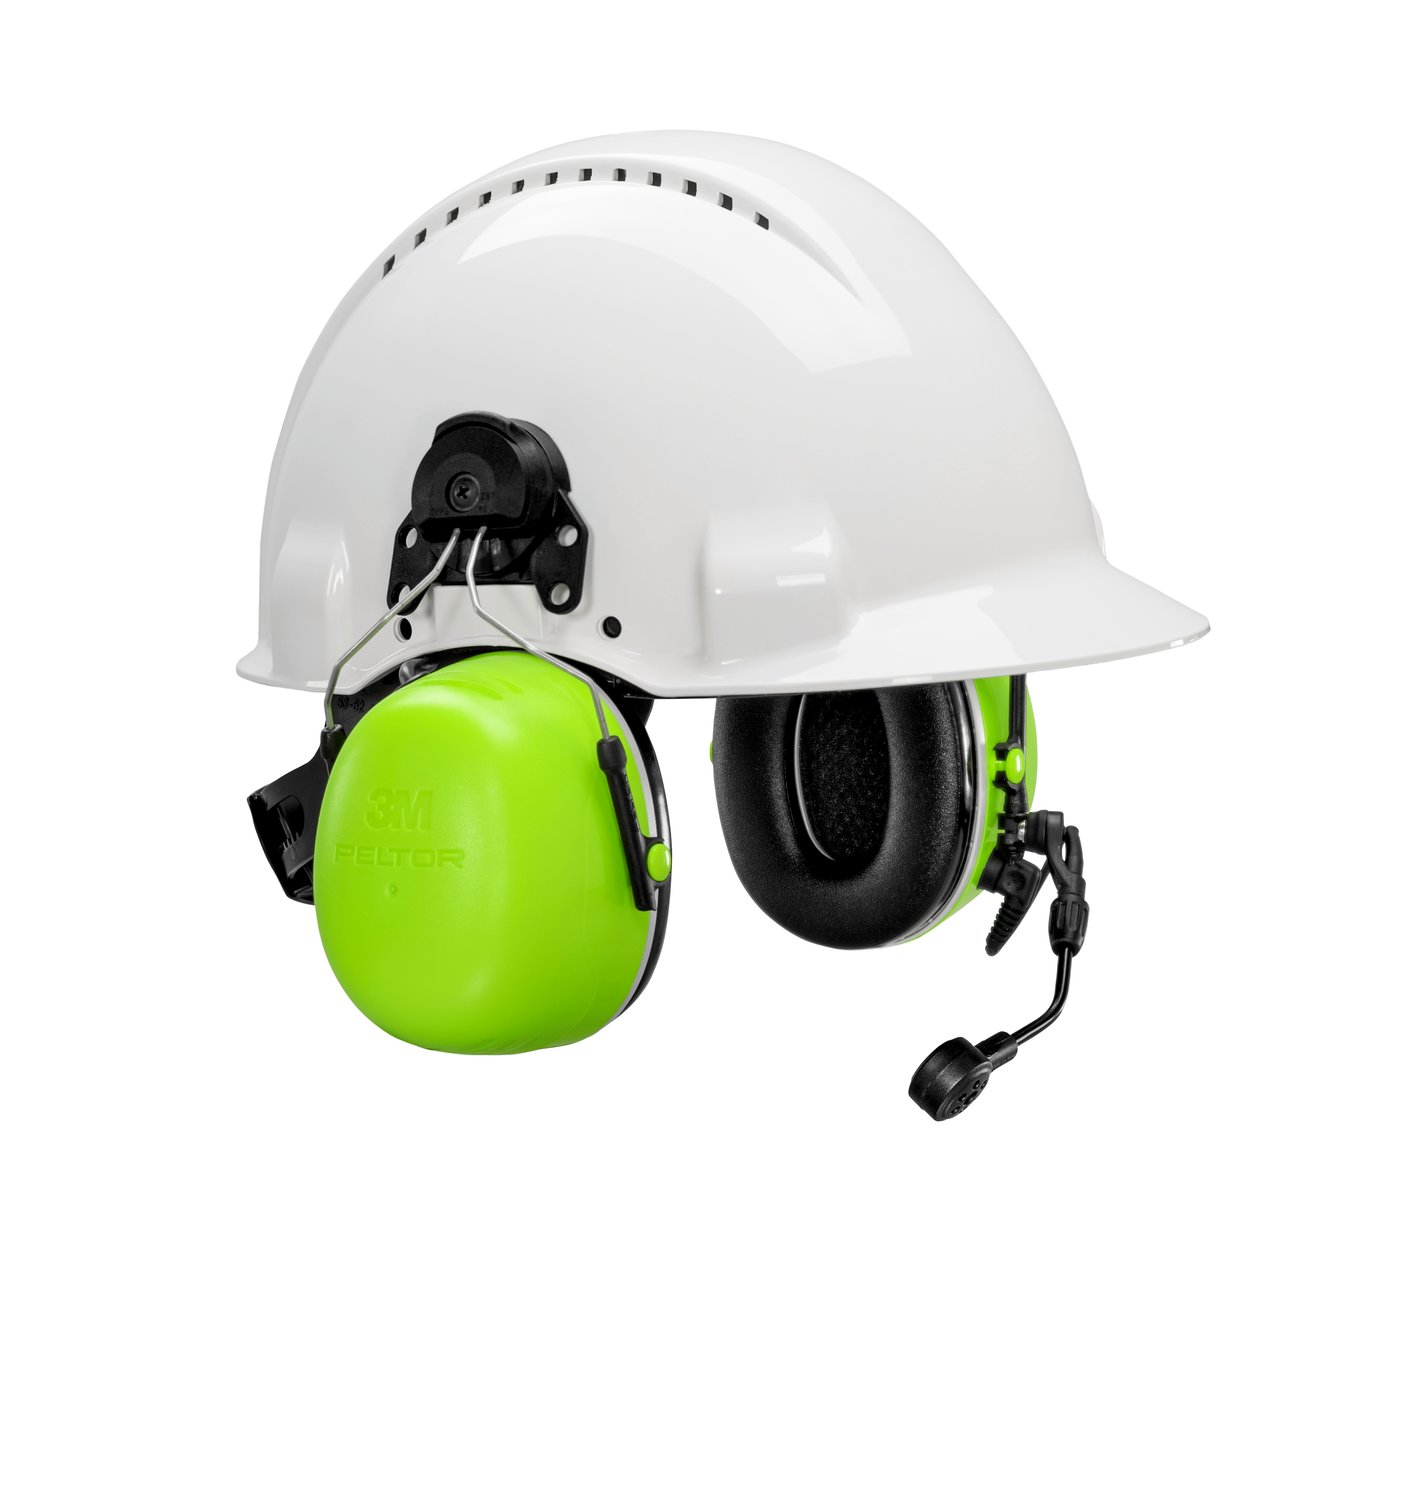 7100099881 - 3M PELTOR CH-5 High Attenuation Headset - MT73H450P3E-77 GB - Flex
Connector - Hard Hat Attached - 29dB NRR